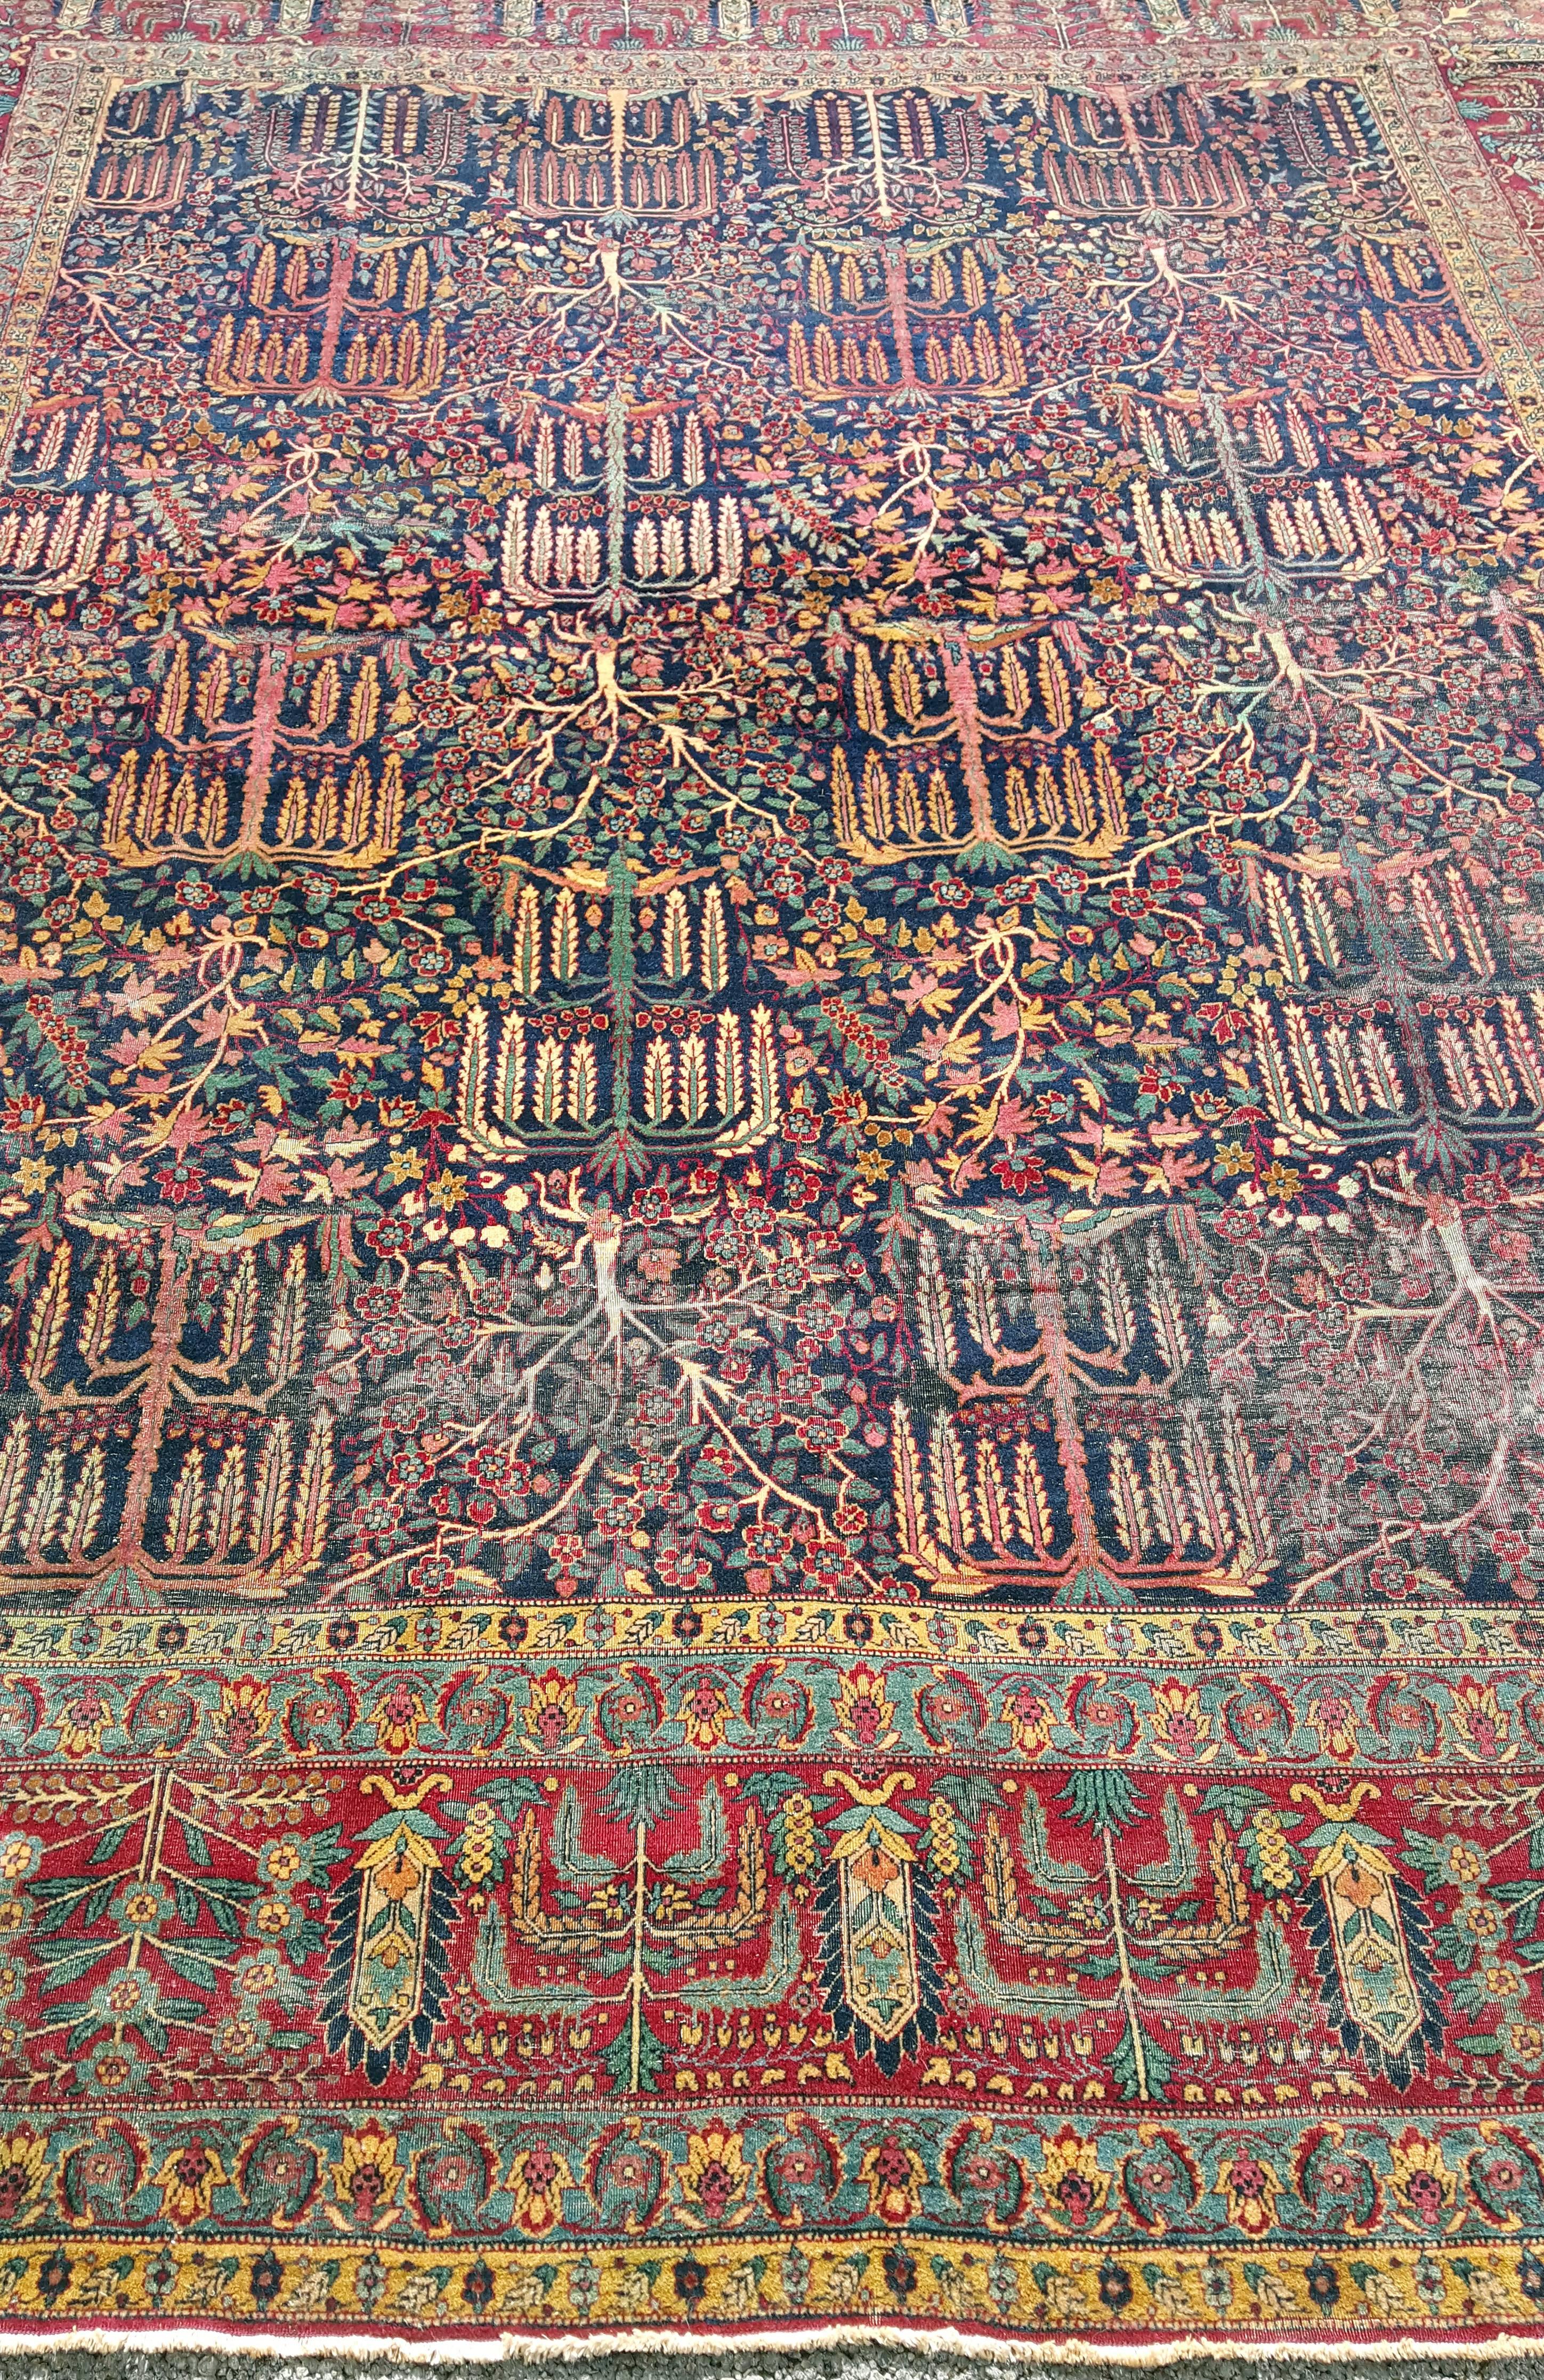 An absolutely stunning Persian (Iranian) rug. This 1930s finely hand-knotted Kerman rug features jewel tones and a plethora of jewel tone colors all blended together in perfect harmony. The rug also features rare tree of life and willow designs.